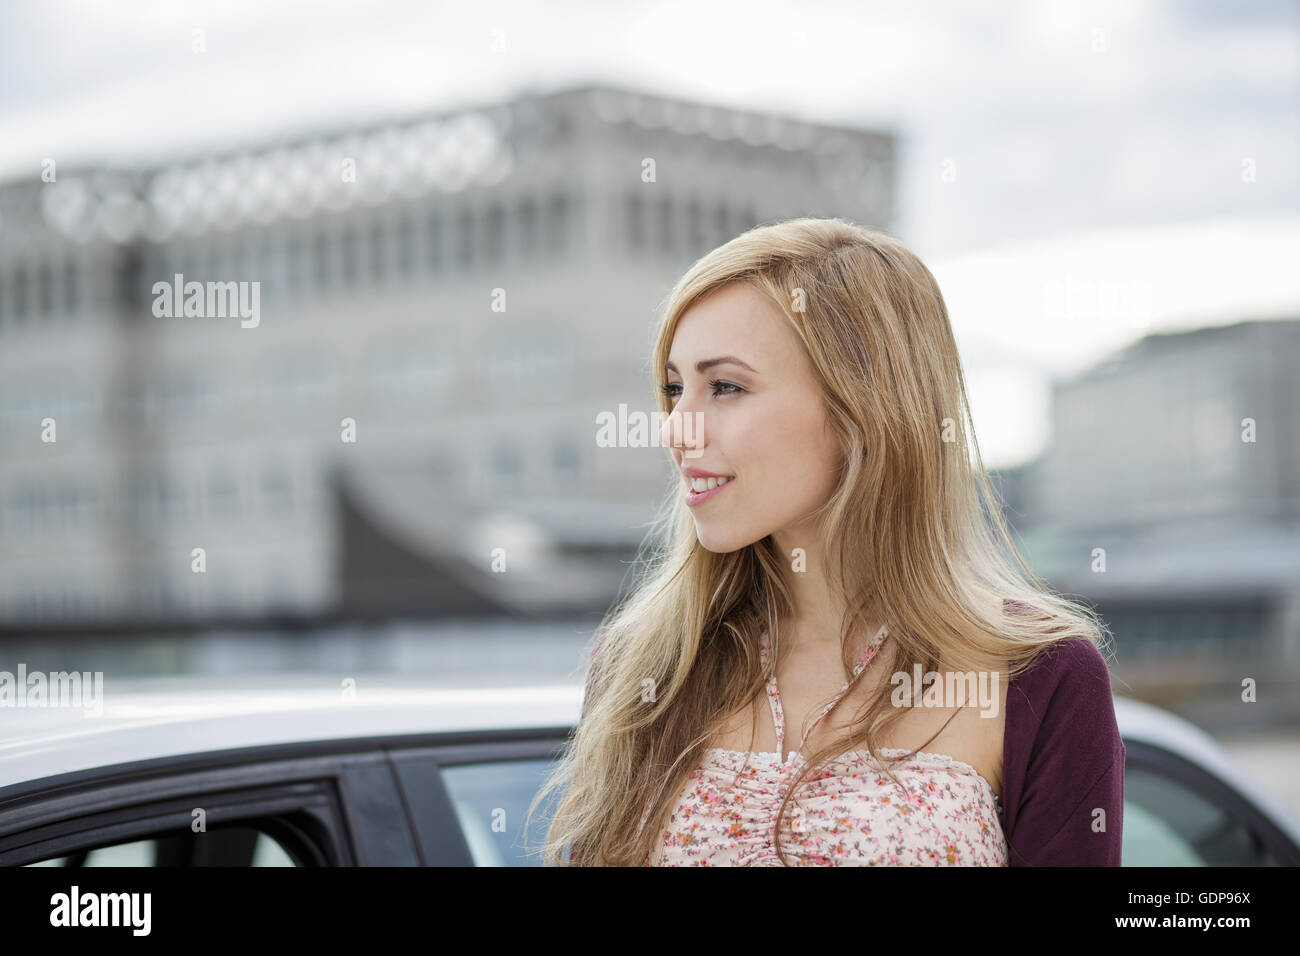 Long haired blond young woman waiting by car in city Stock Photo